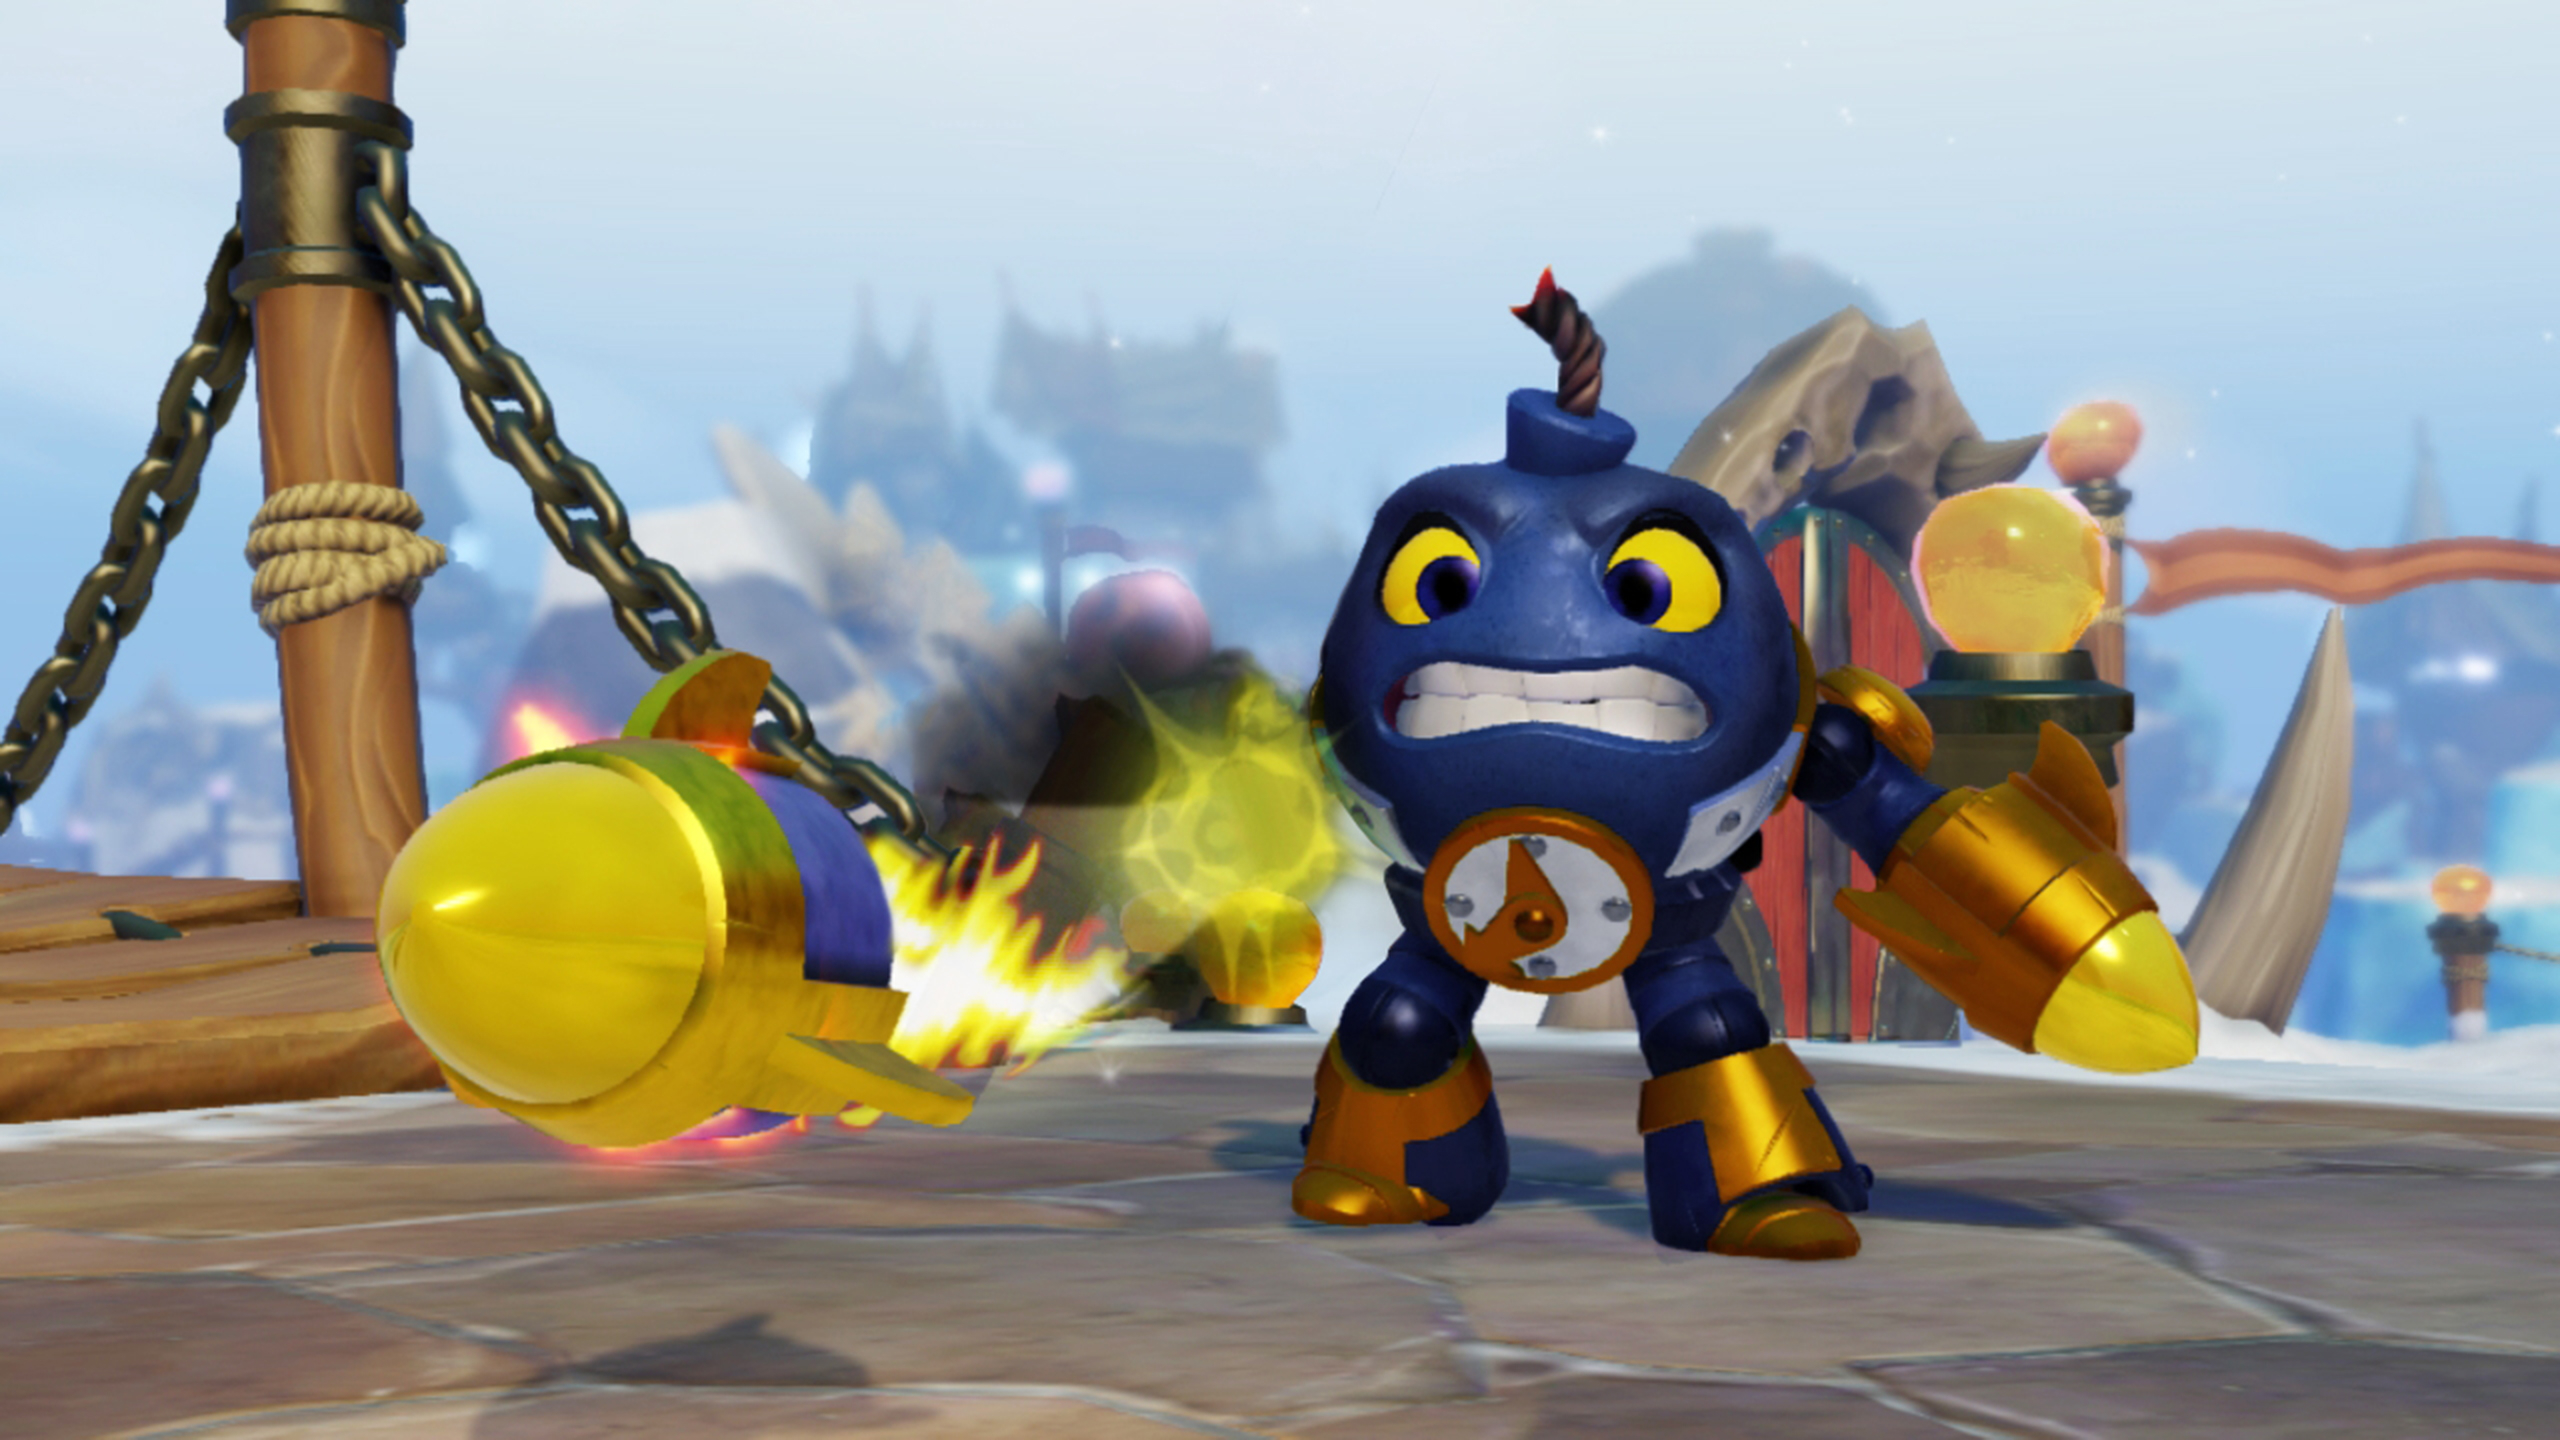 This Skylanders Swap Force Wallpaper Is Available In Sizes